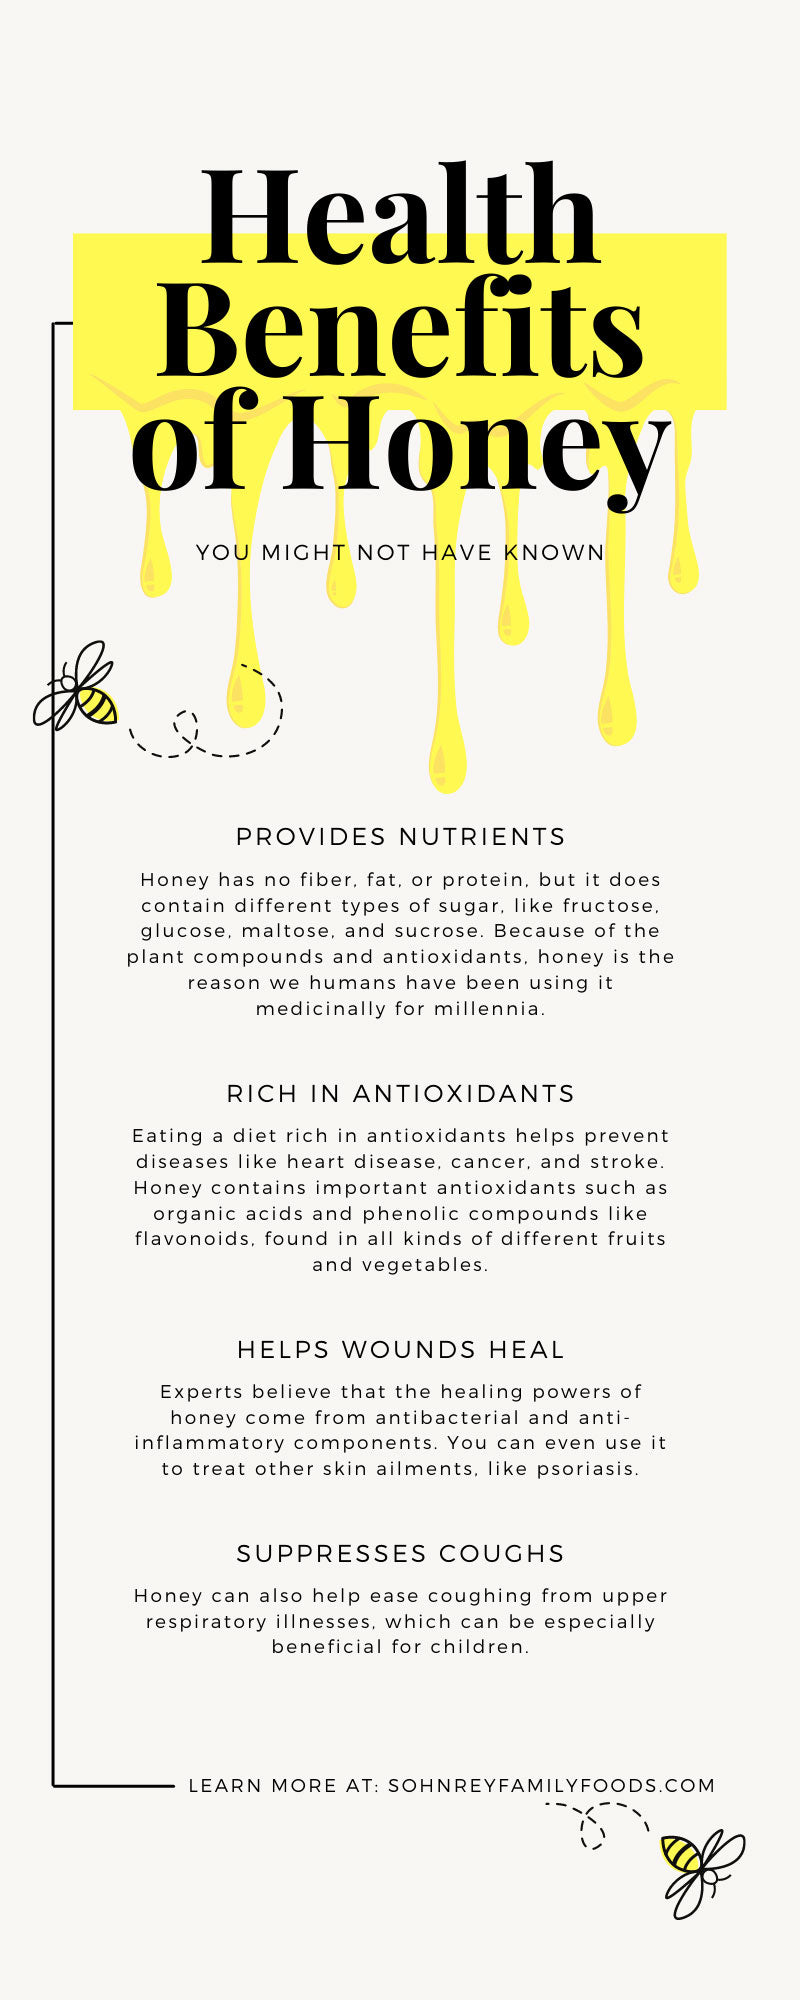 Health Benefits of Honey You Might Not Have Known